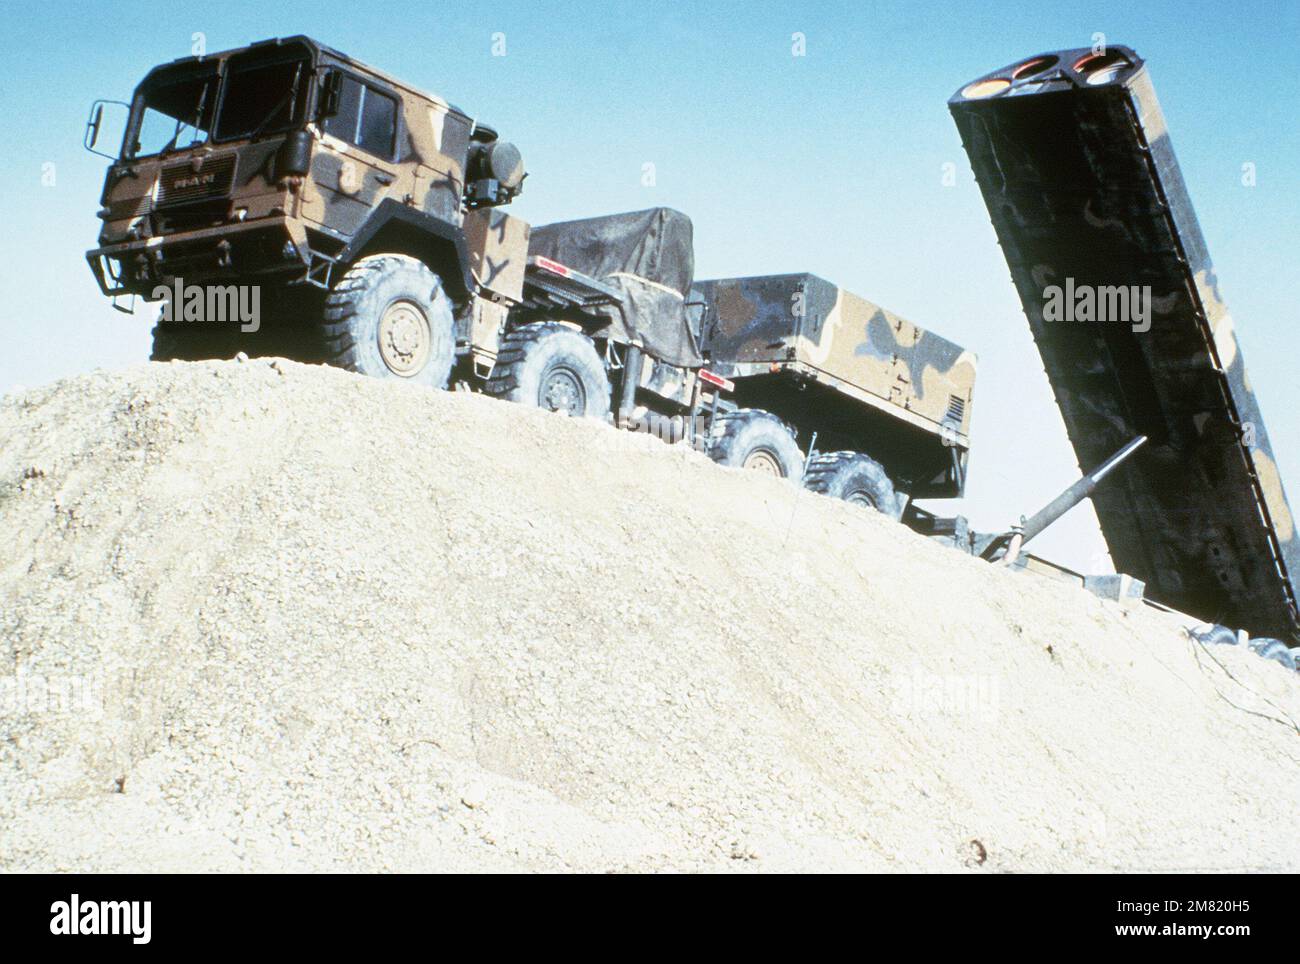 DF-ST-85-12537. Base: Dugway Proving Grounds State: Utah (UT) Country: United States Of America (USA) Stock Photo